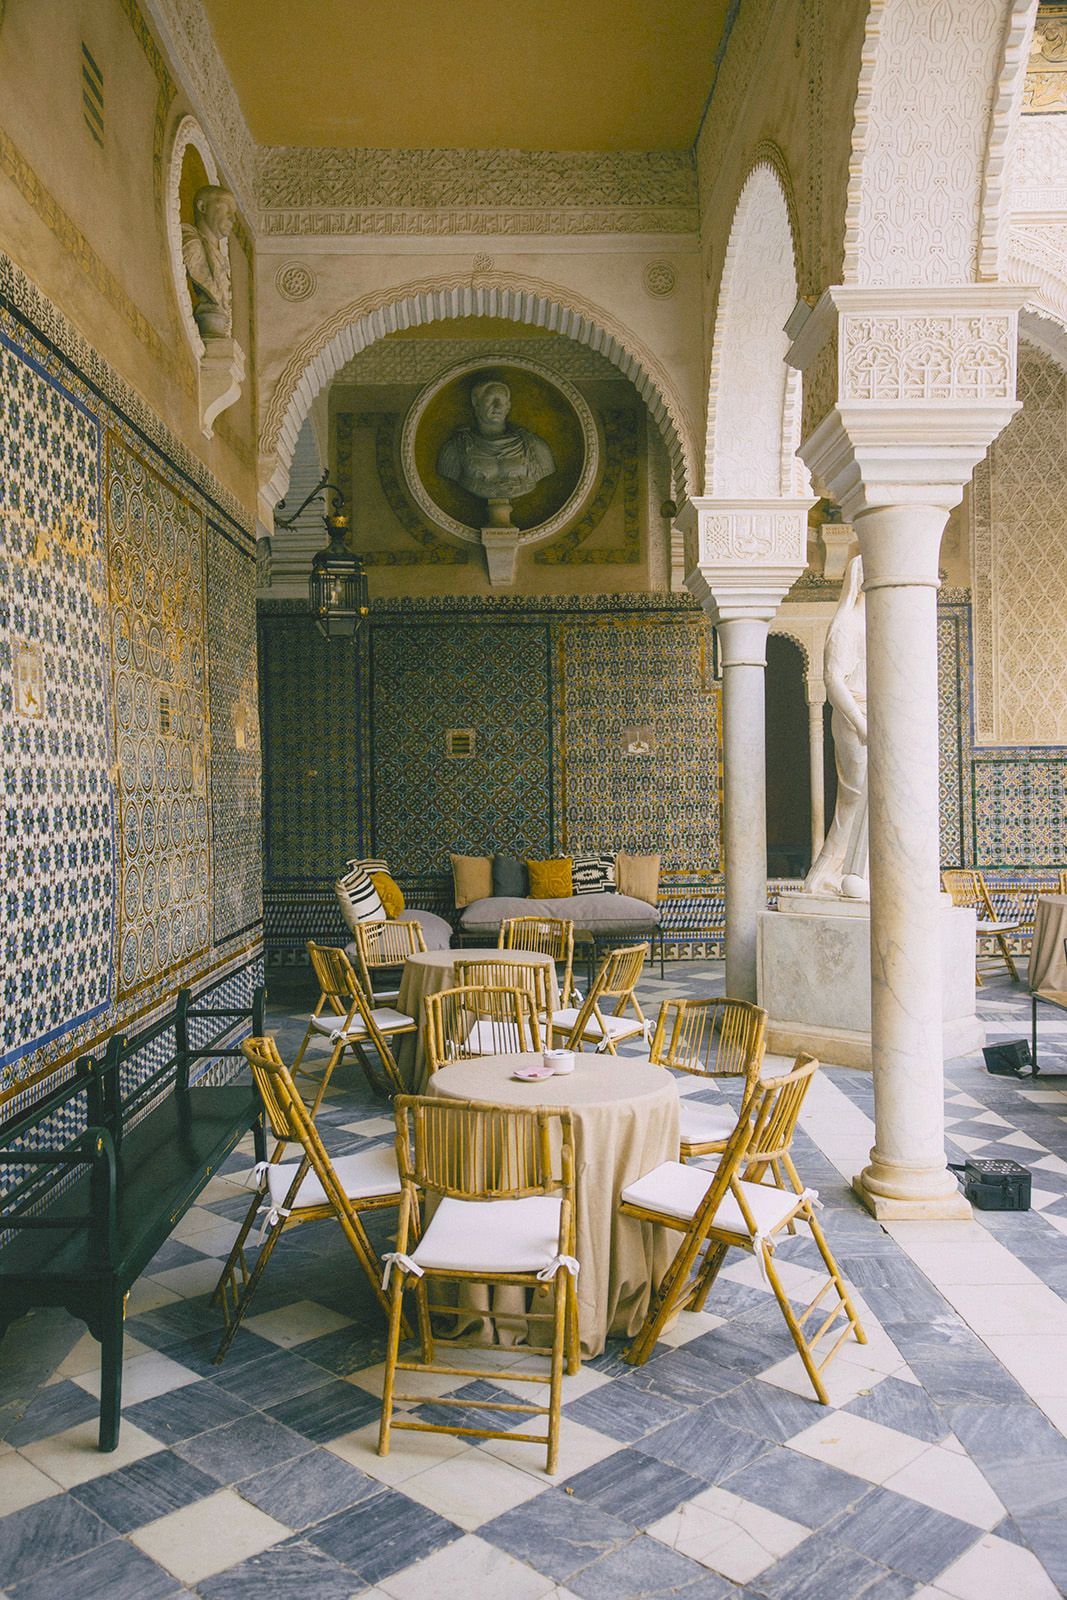 Courtyard corner at Andalusian-Moorish style party in Seville Spain